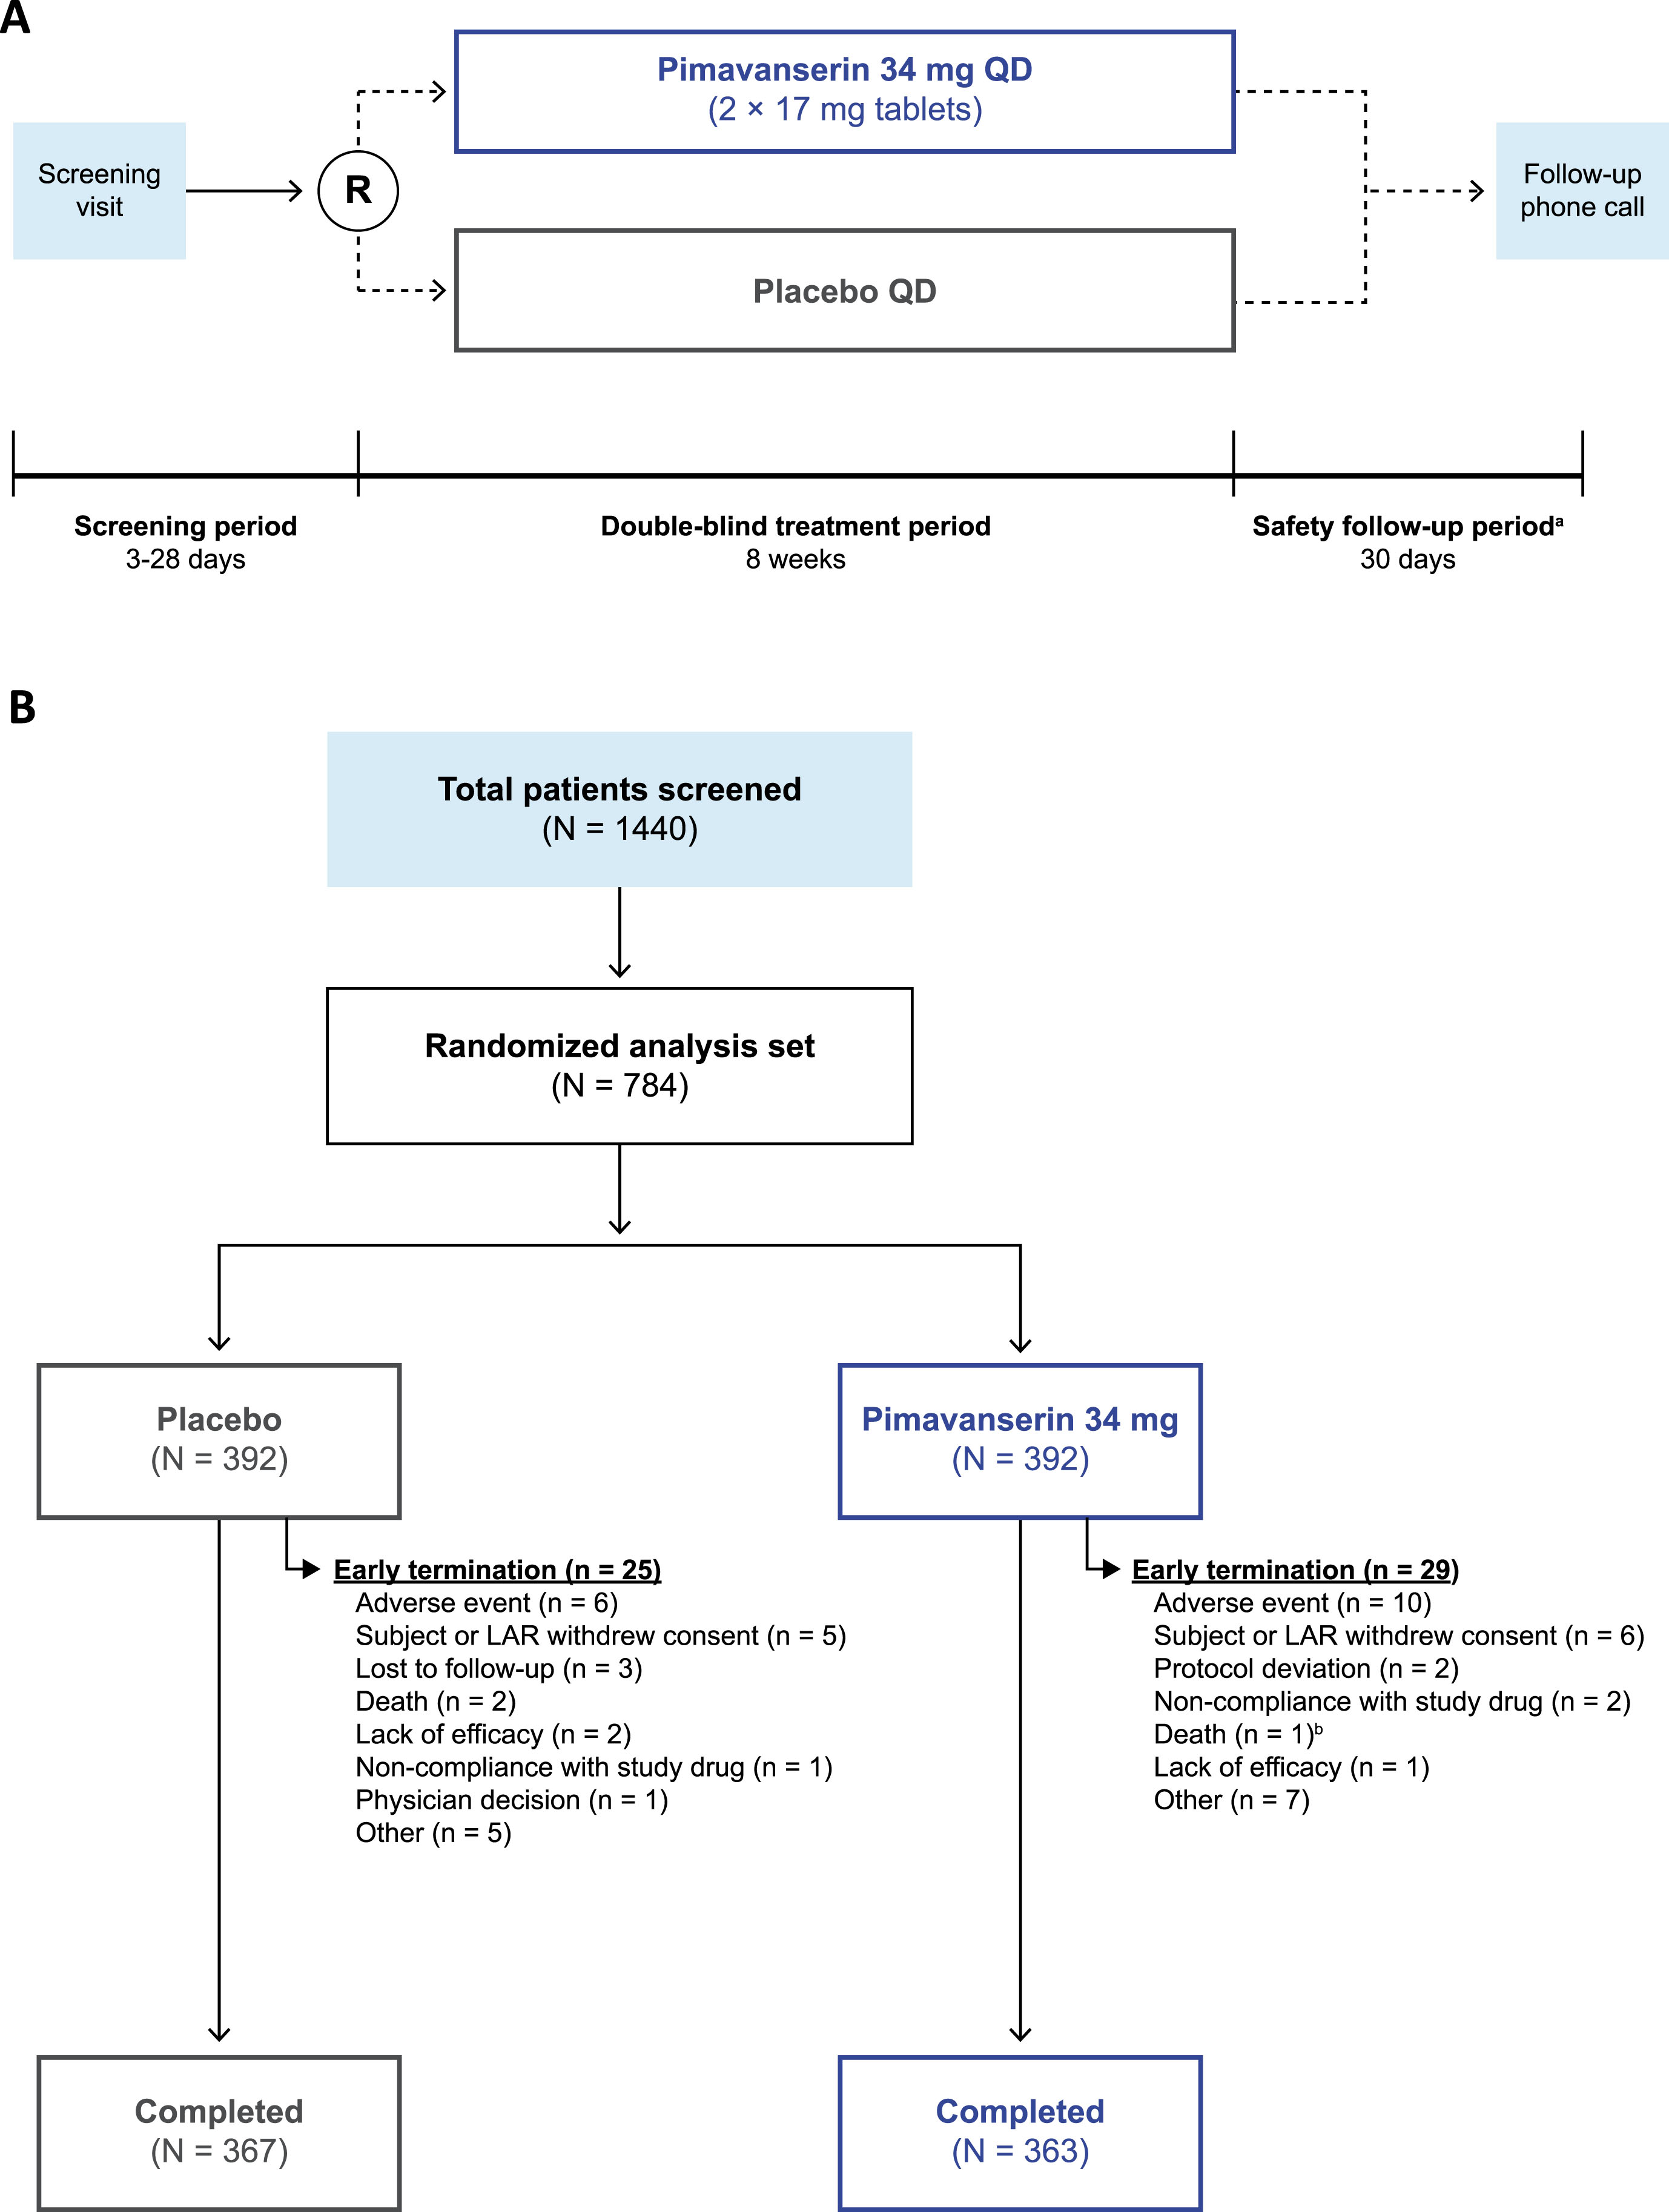 The (A) study design and (B) patient disposition of the trial. aSubjects who enrolled in the open-label extension study did not complete the safety follow-up period. bIn the pimavanserin group, one patient was discontinued from the study due to an adverse event and died 4 days after the early termination visit and 4 days after stopping study drug. LAR, legally acceptable representative; R, randomization; QD, once daily.